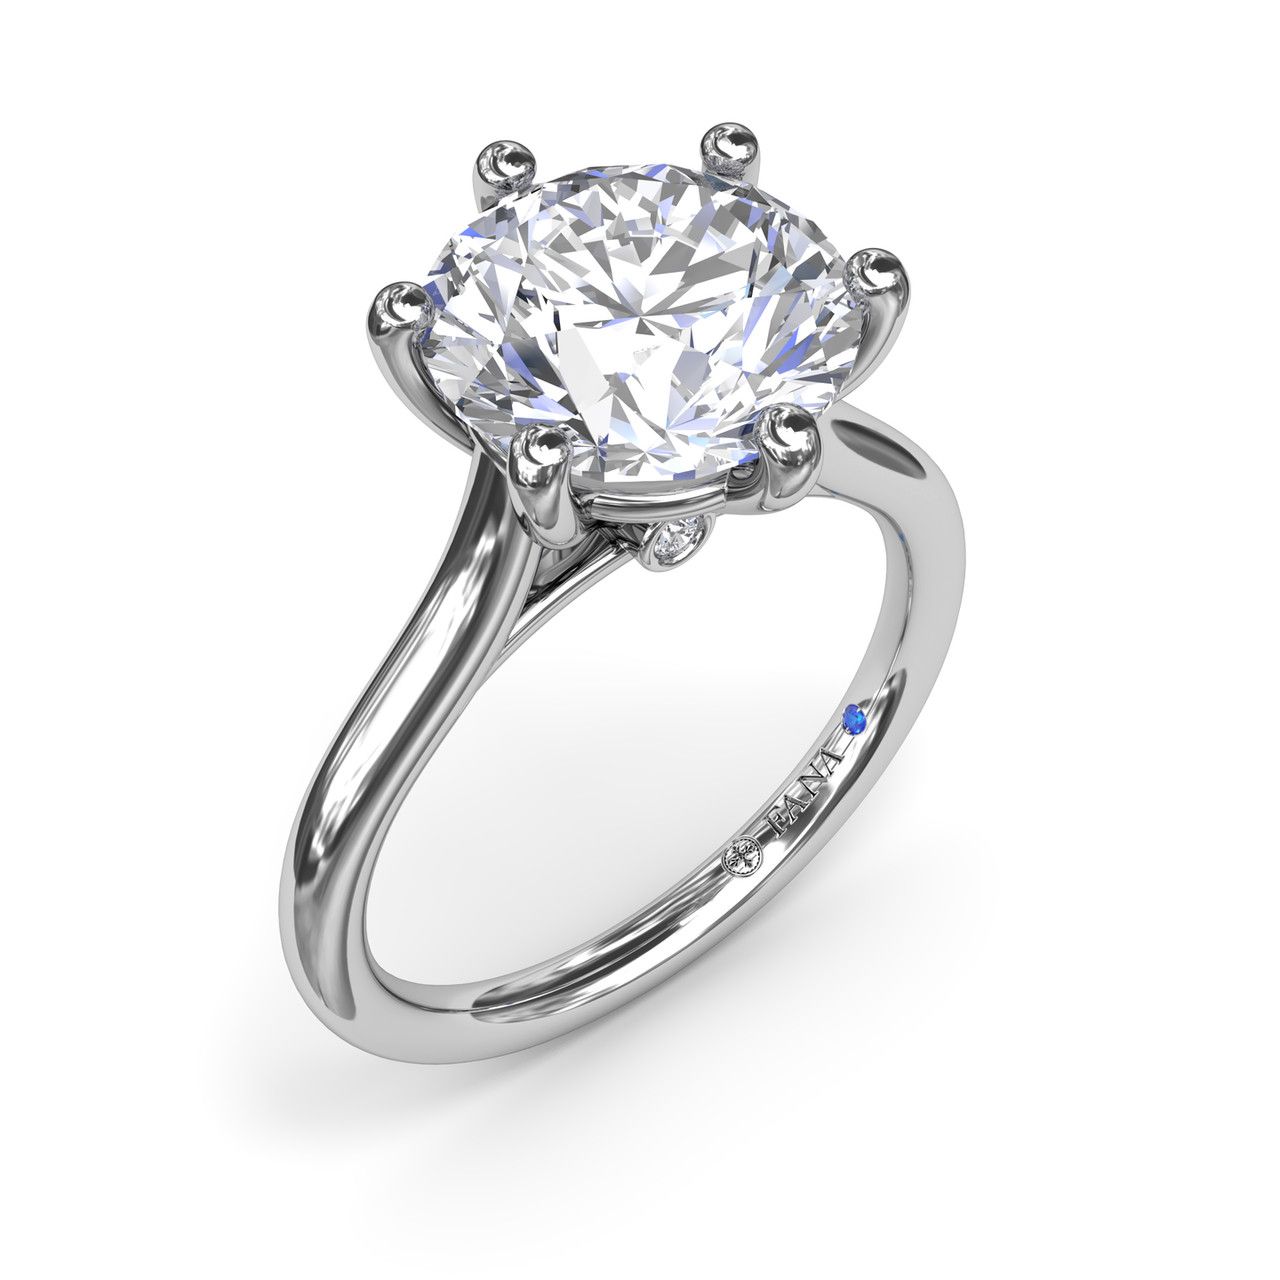 14K WHITE GOLD SOLITAIRE SEMI-MOUNT RING SIZE 6.5 WITH 2=0.02TW ROUND G-H VS2-SI1 DIAMONDS AND ONE ROUND BLUE SAPPHIRE   (4.14 GRAMS)